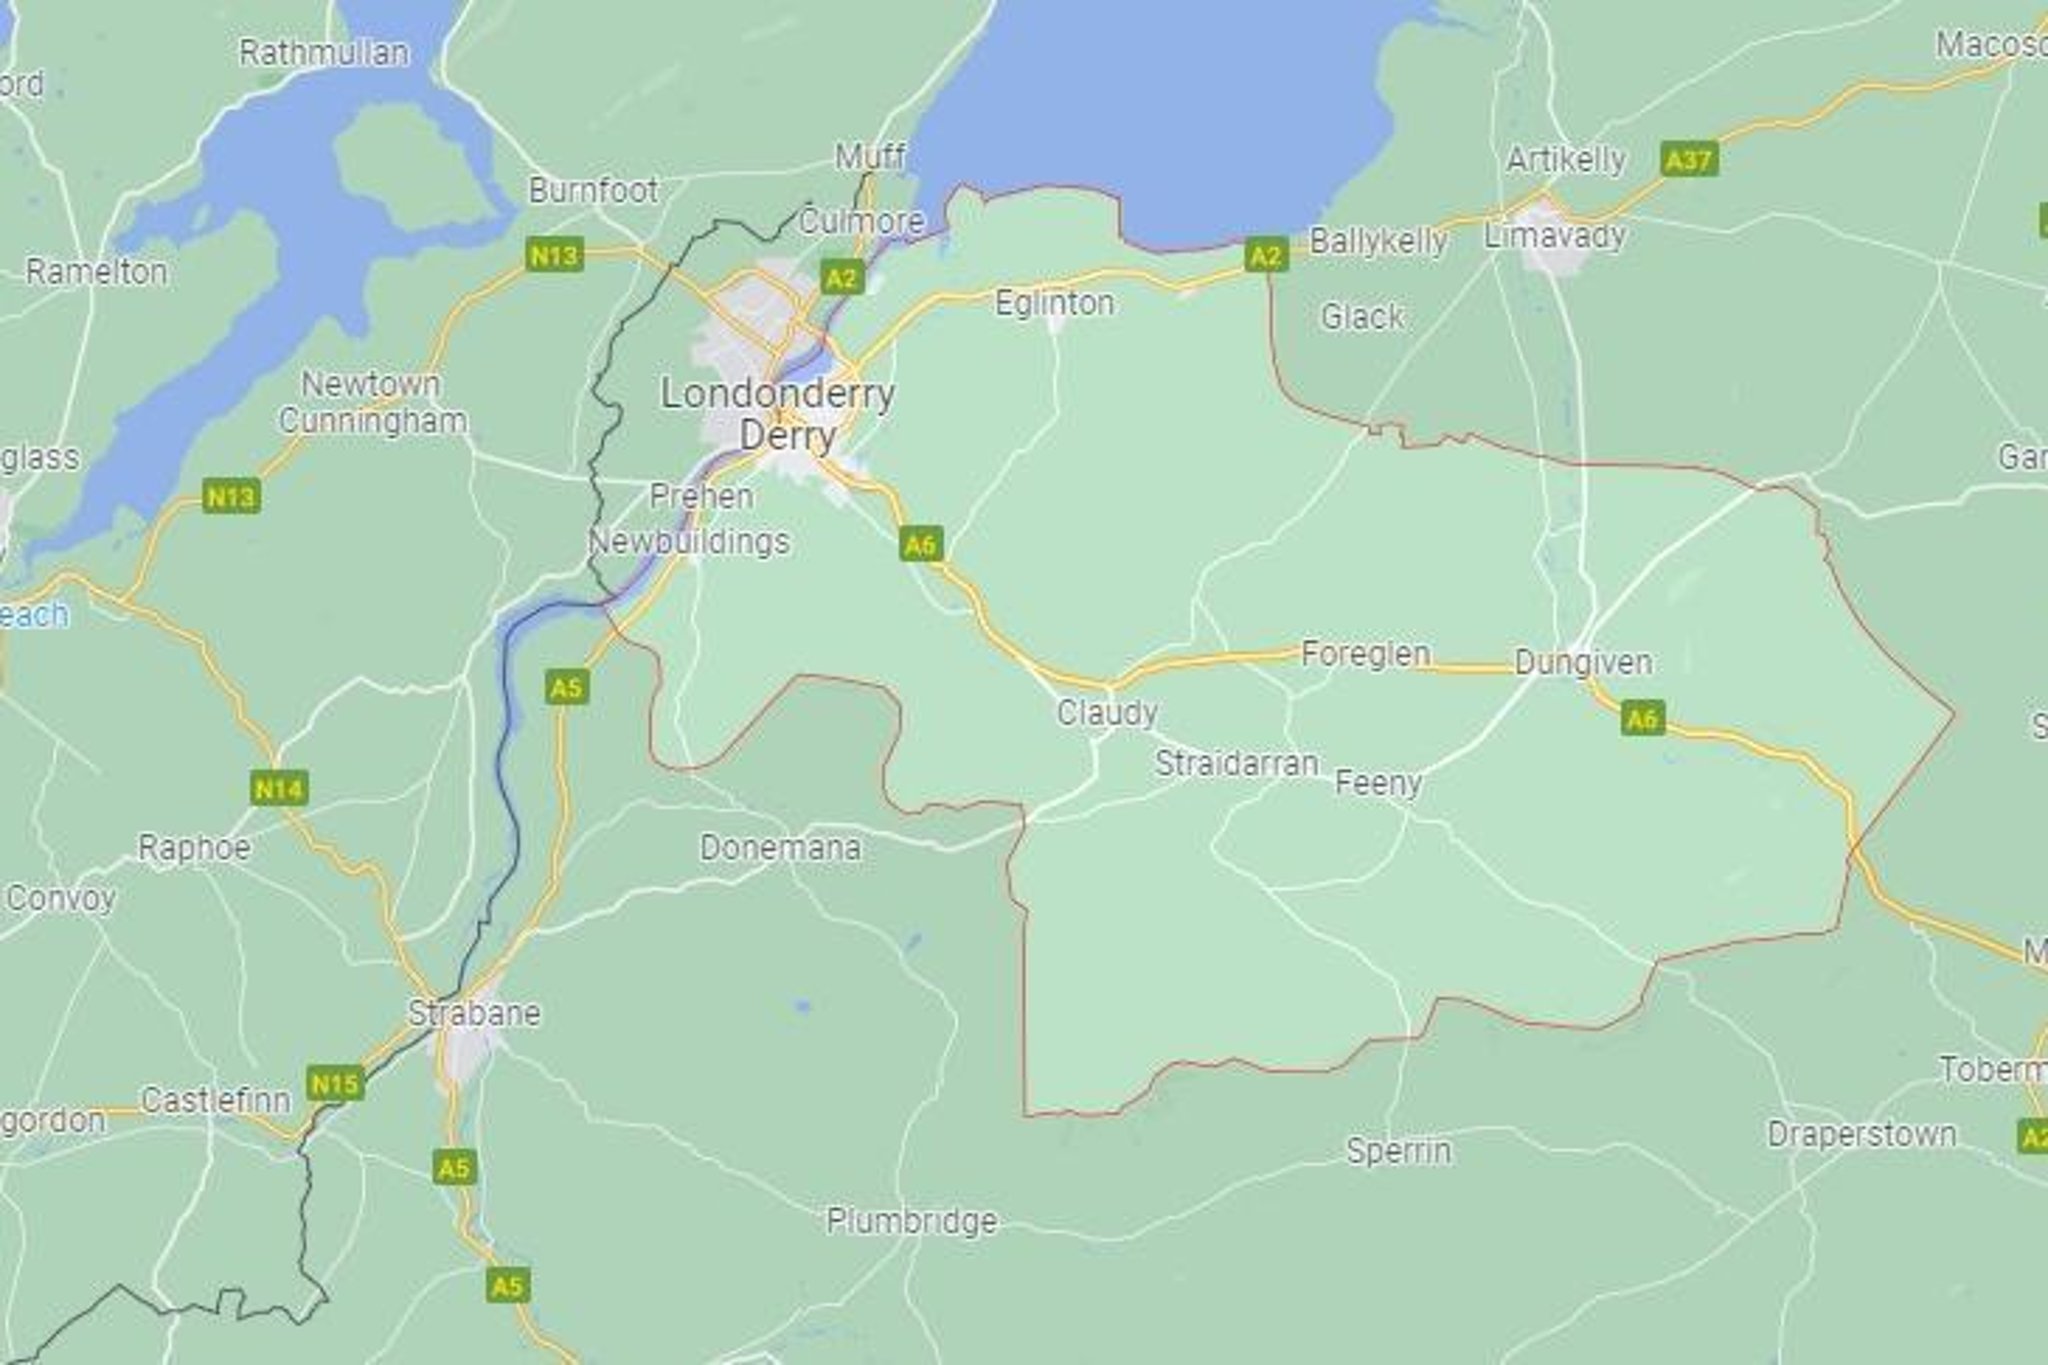 Here are the postcodes with the highest number of positive Covid cases in Northern Ireland